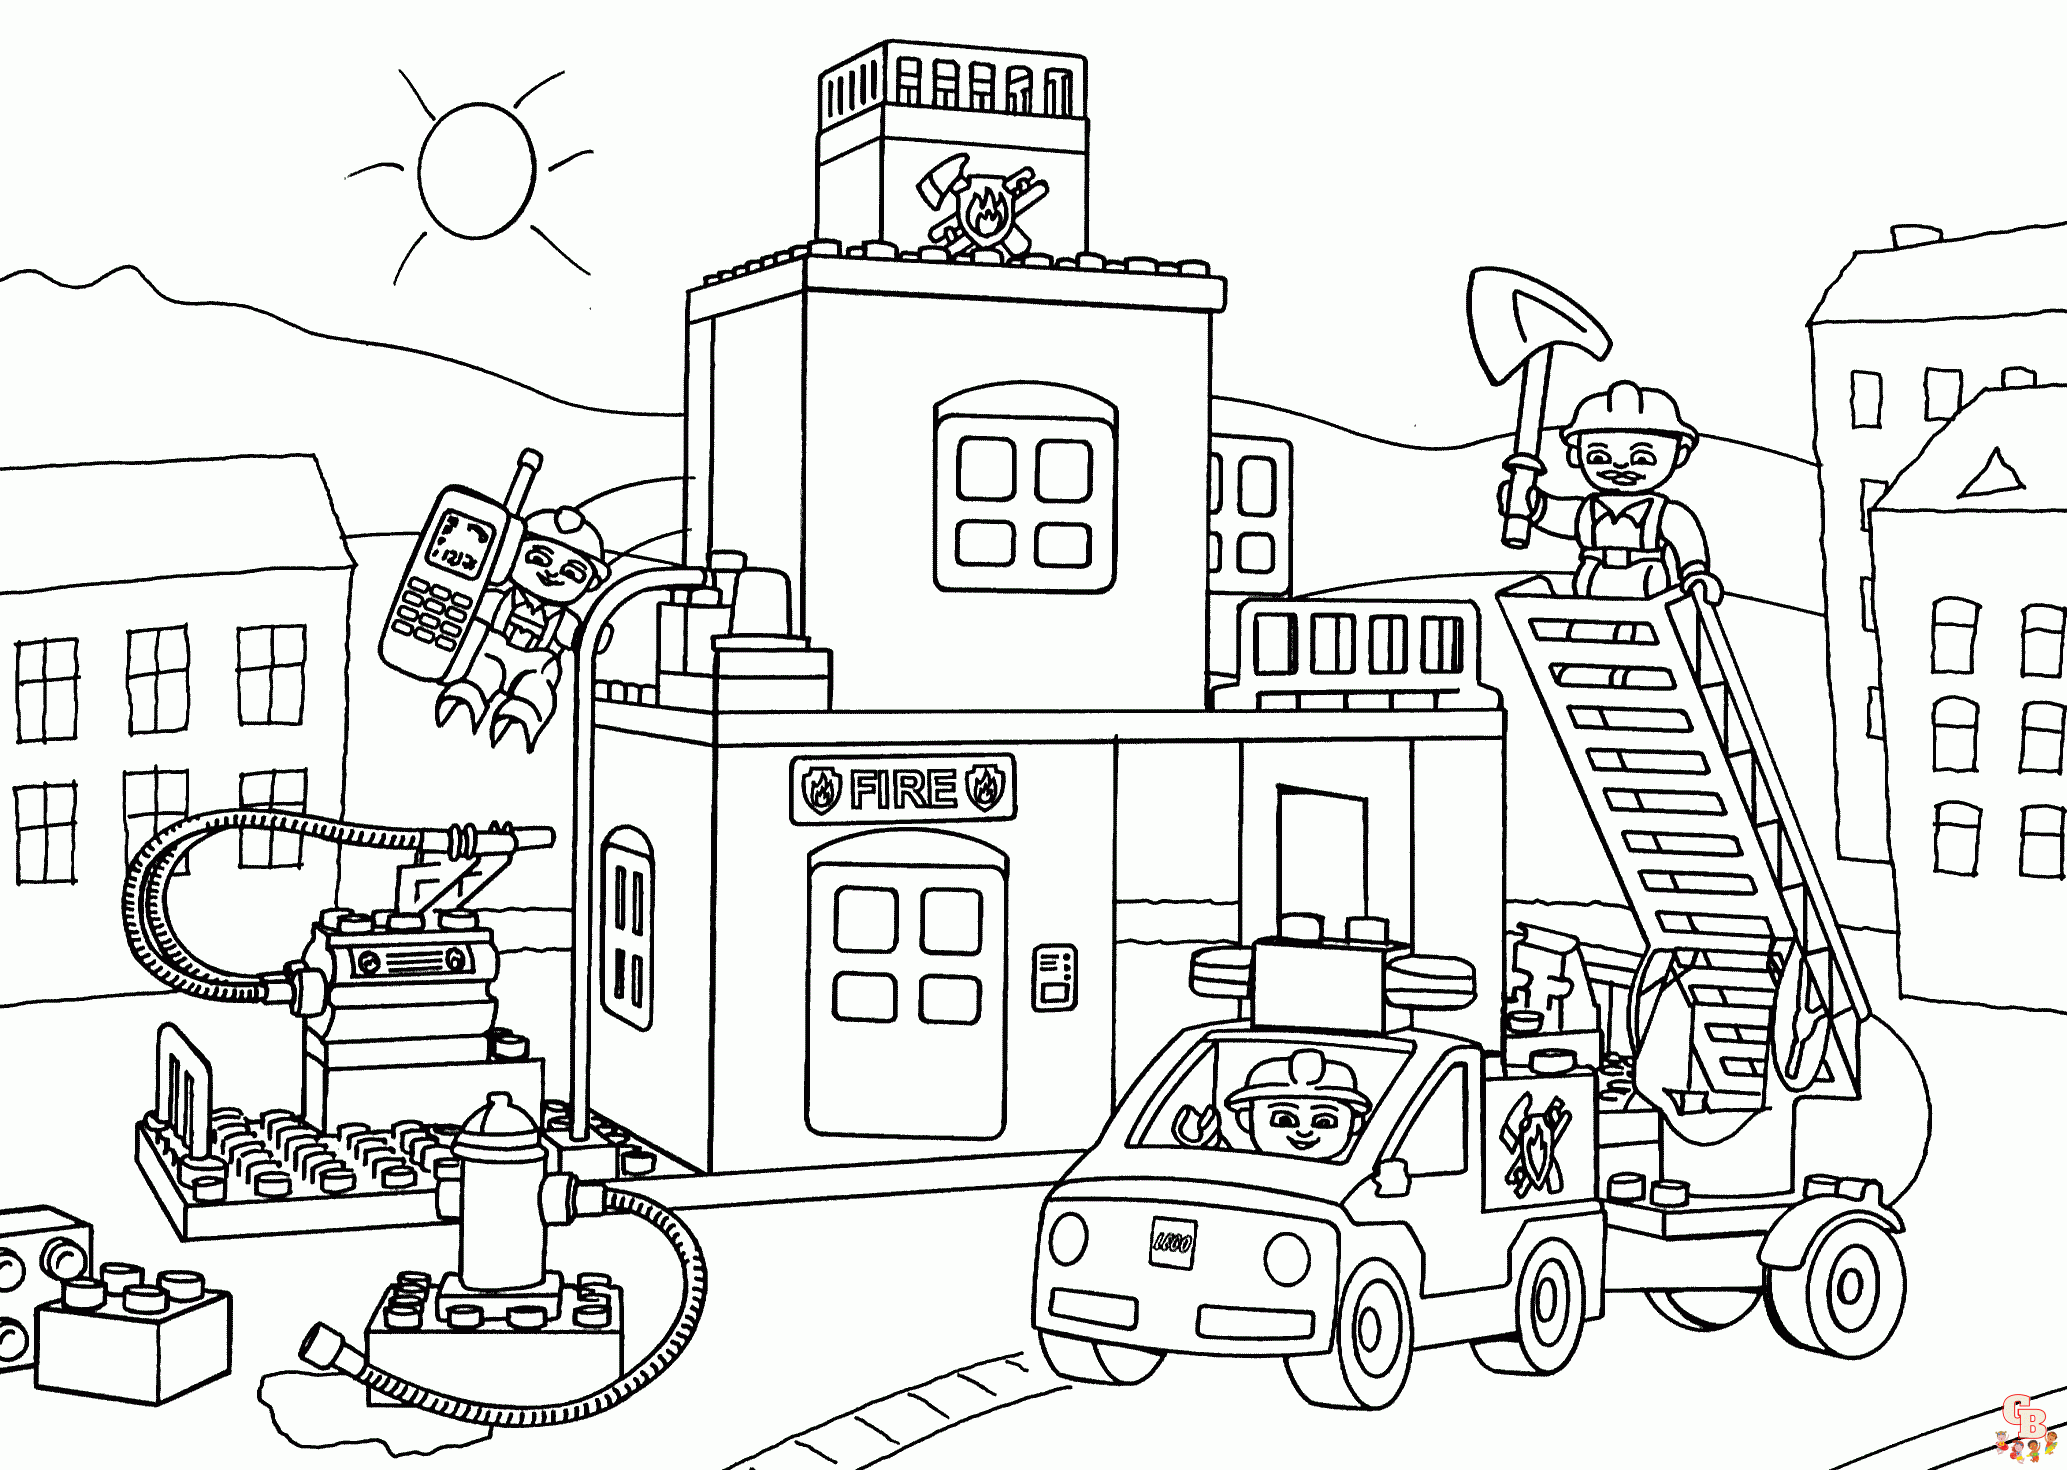 Fire station Coloring Sheets